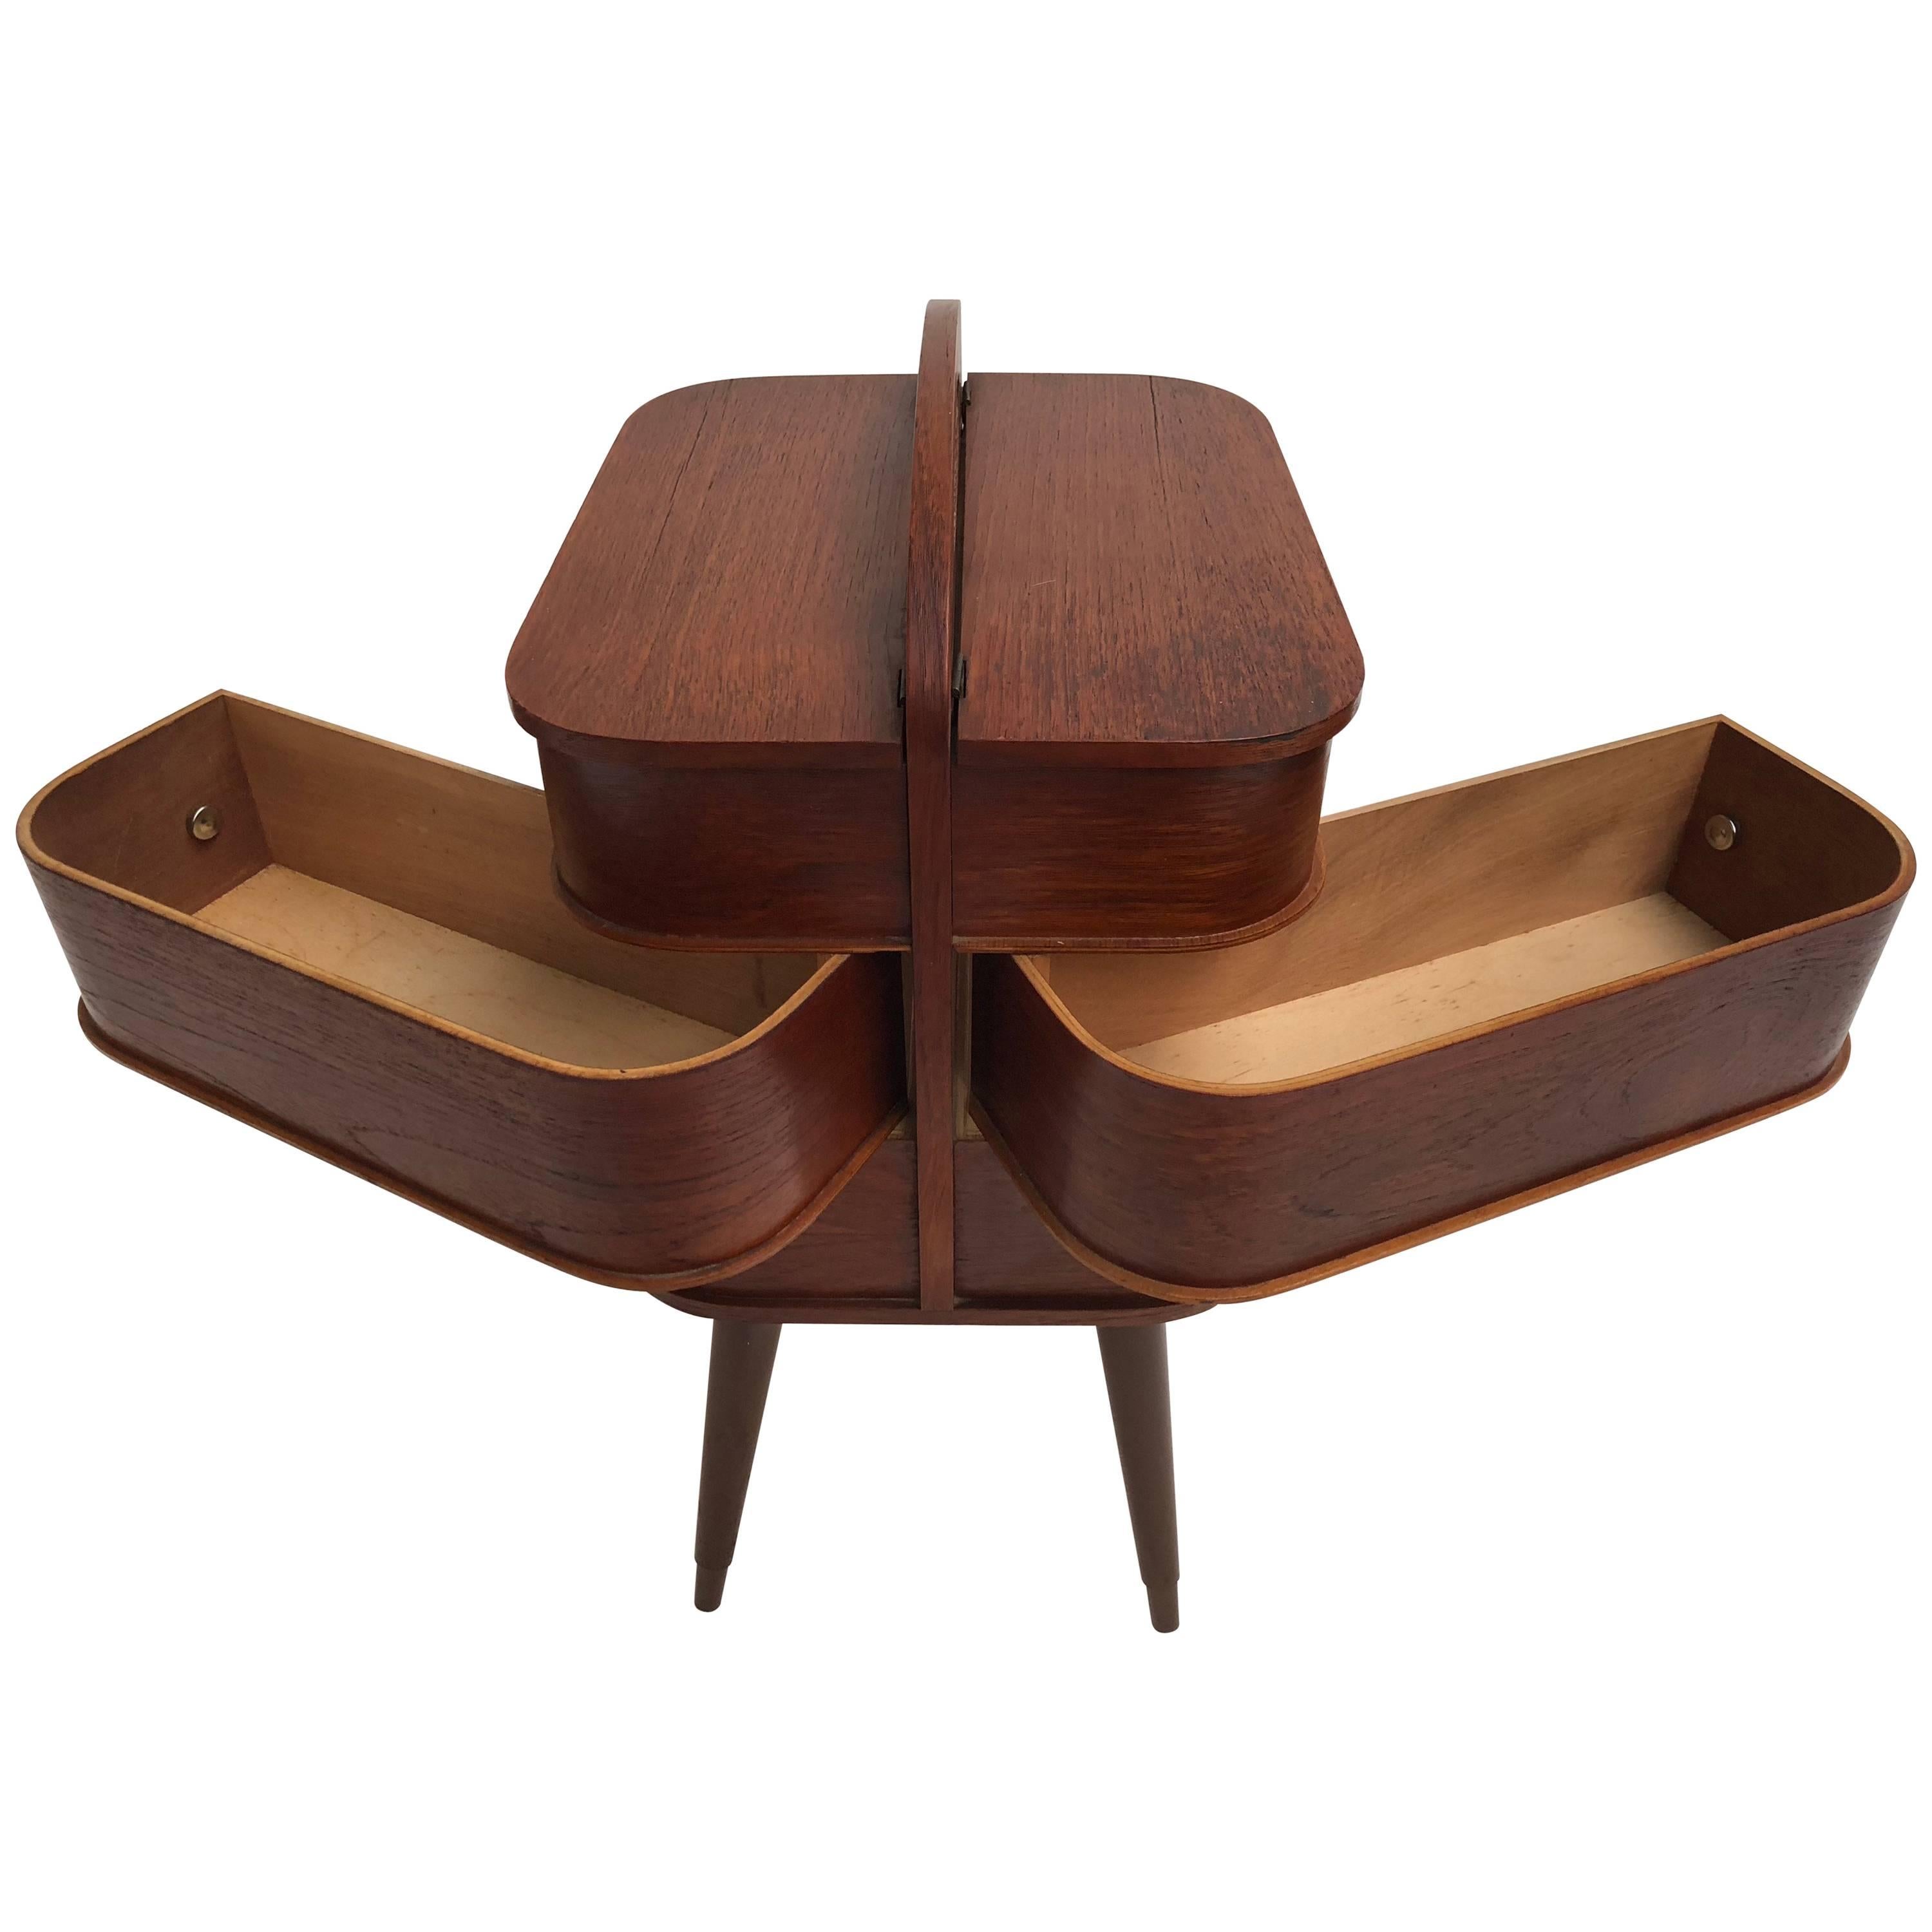 Adorable Danish Teak Plywood Sewing Box Distributed by Pastoe in the 1950s